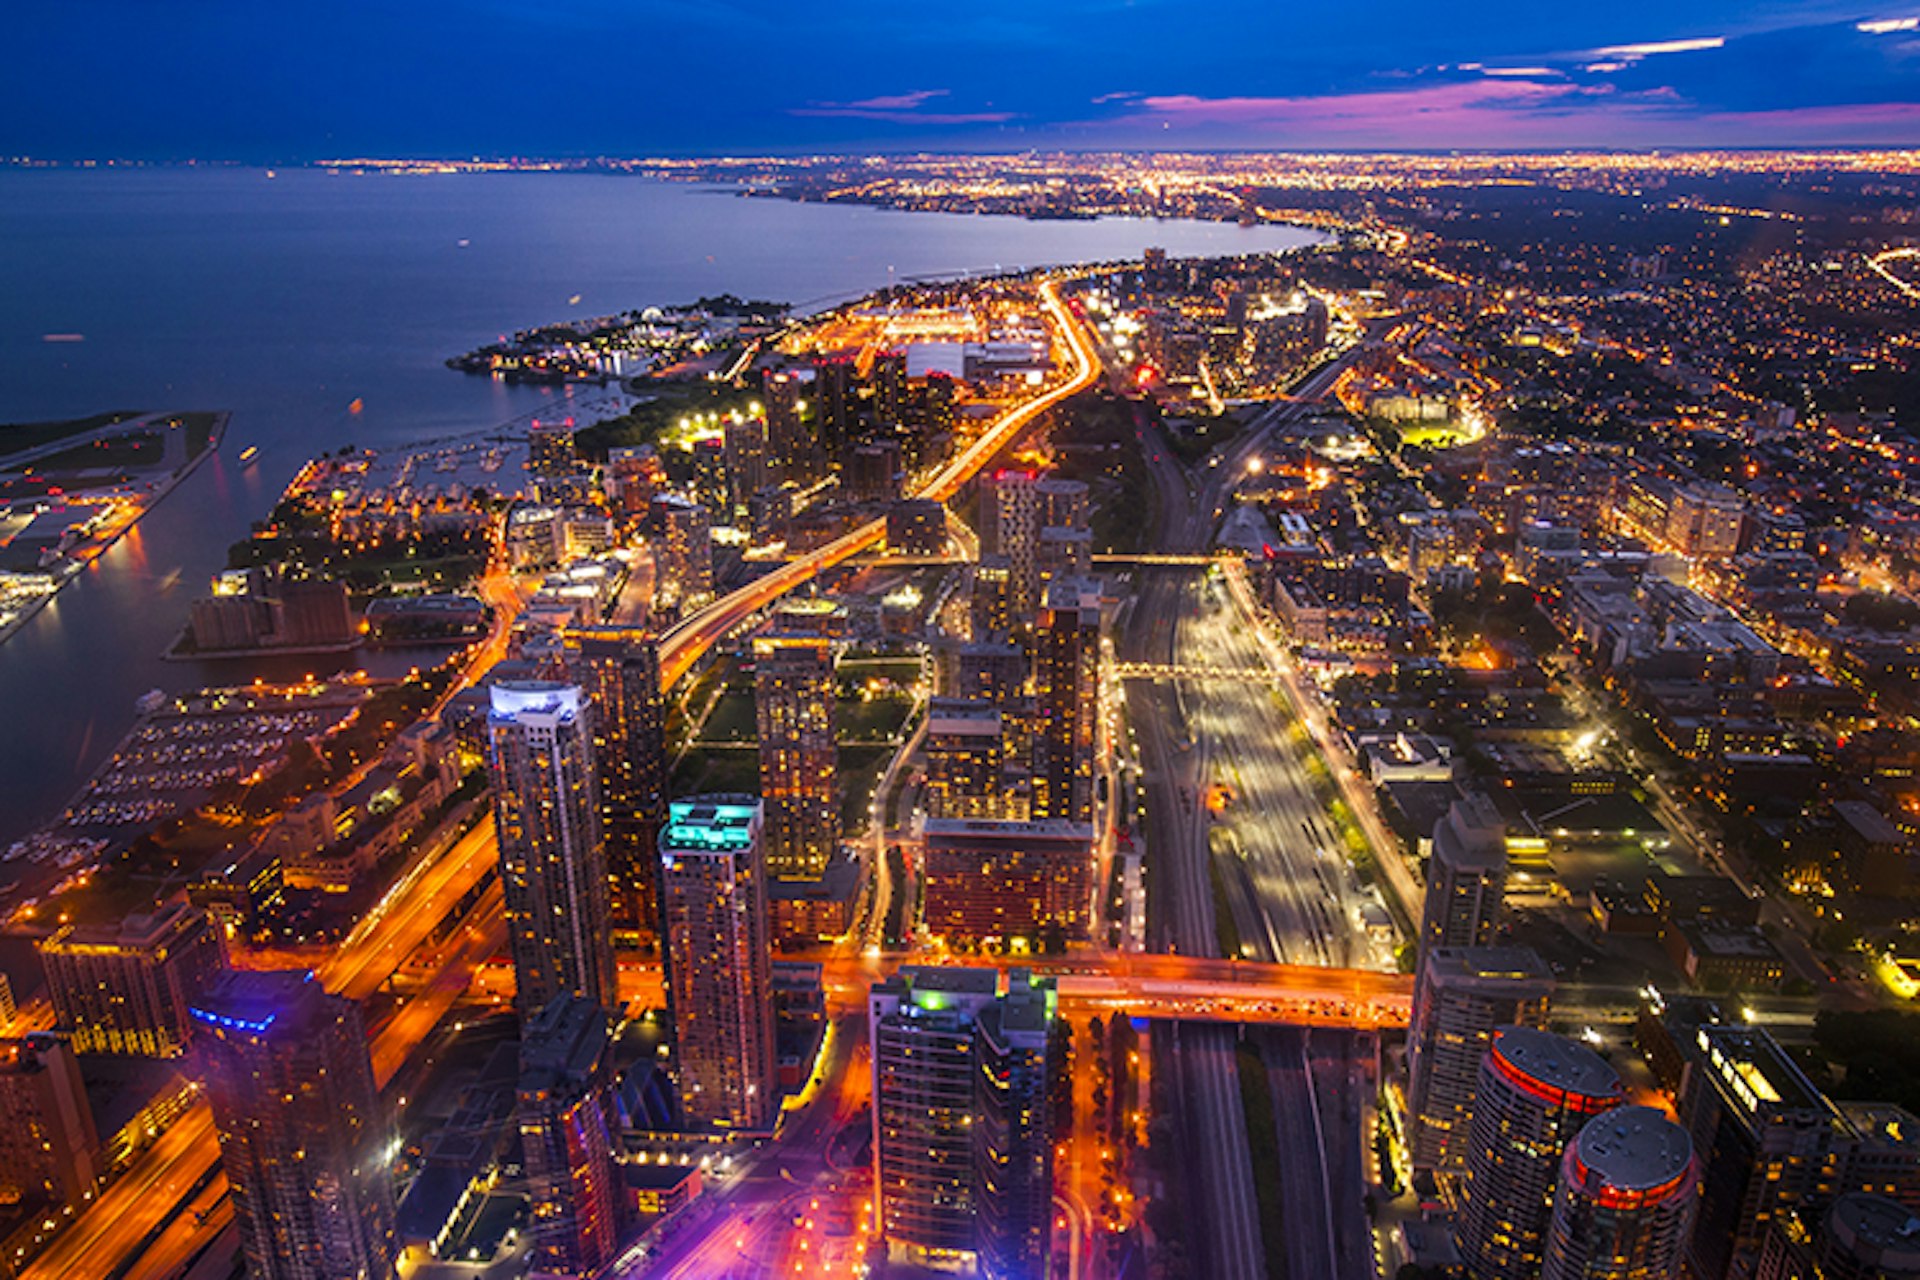 View of Toronto from the CN Tower. Image by naibank / Moment / Getty